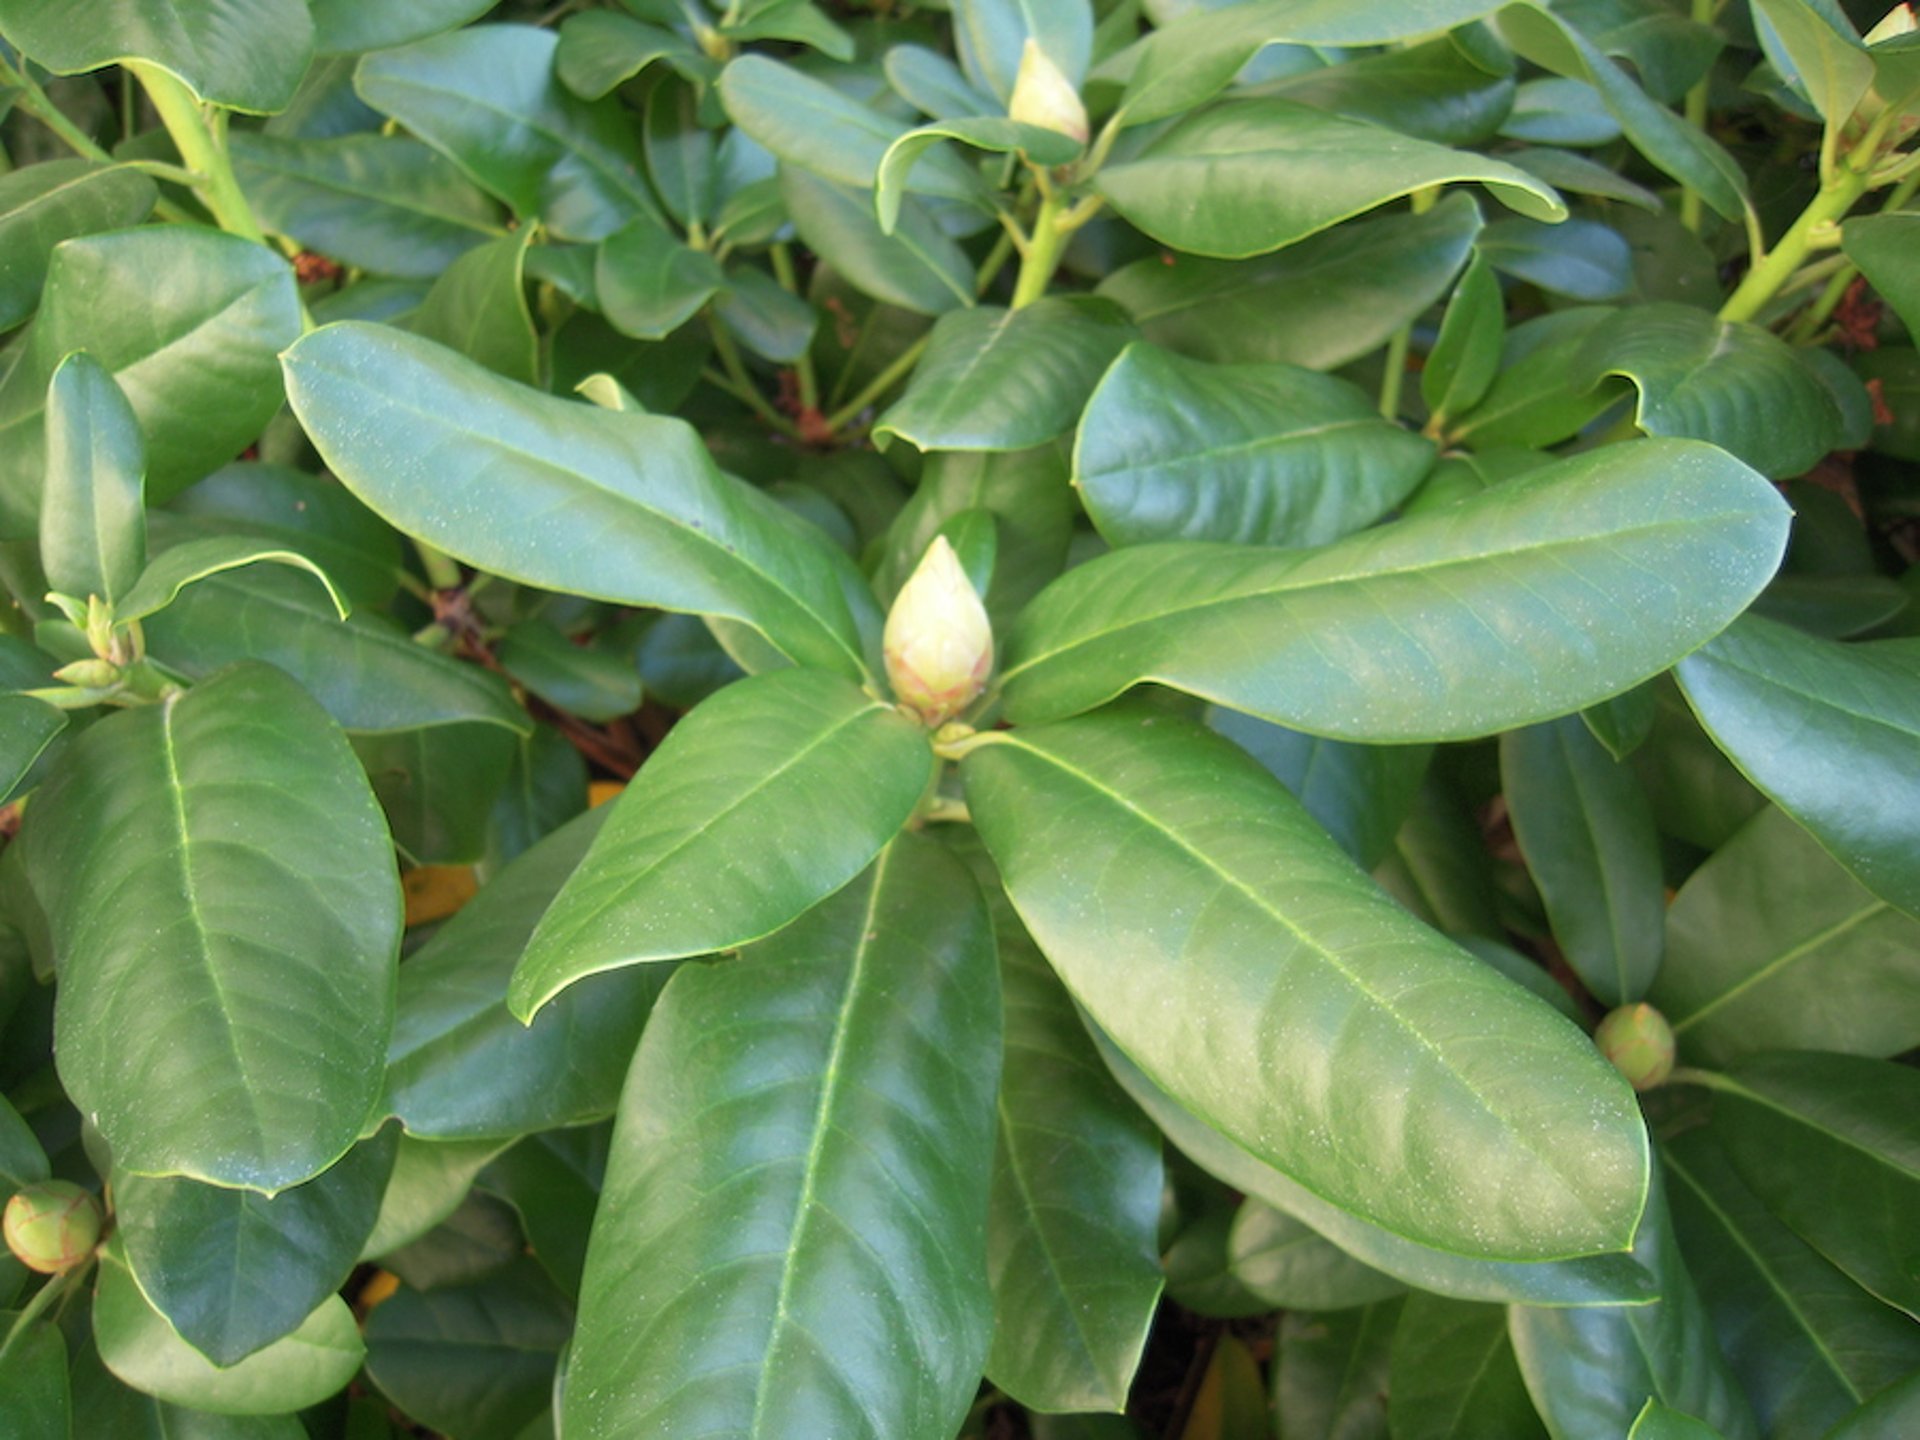 Rhododendron, leaves and bud (<i >Rhododendron</i> spp)